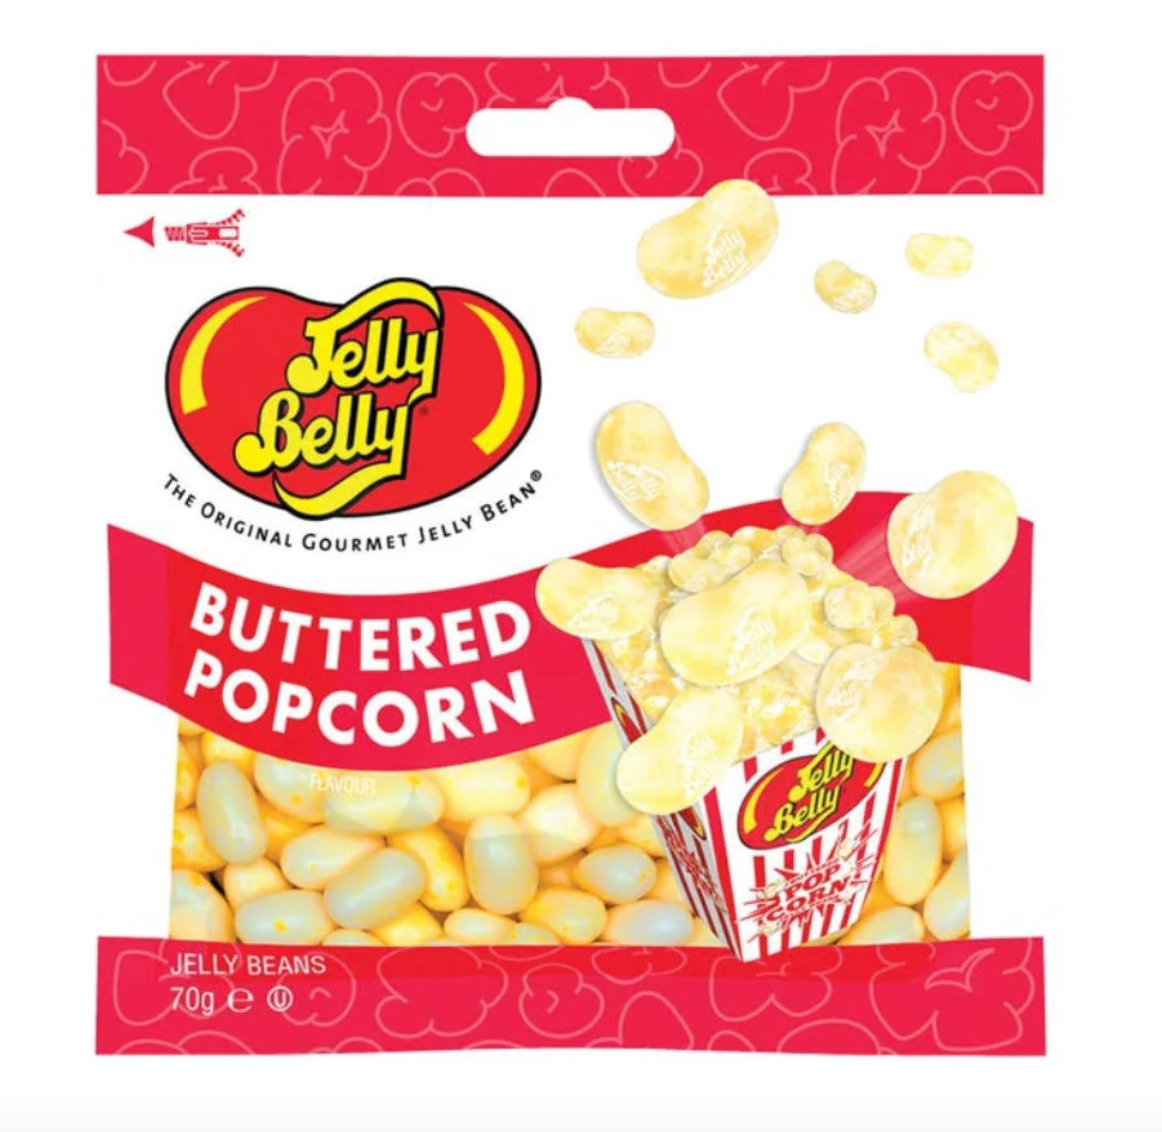 Jelly Belly Buttered Popcorn Jelly Beans - 100g Bag